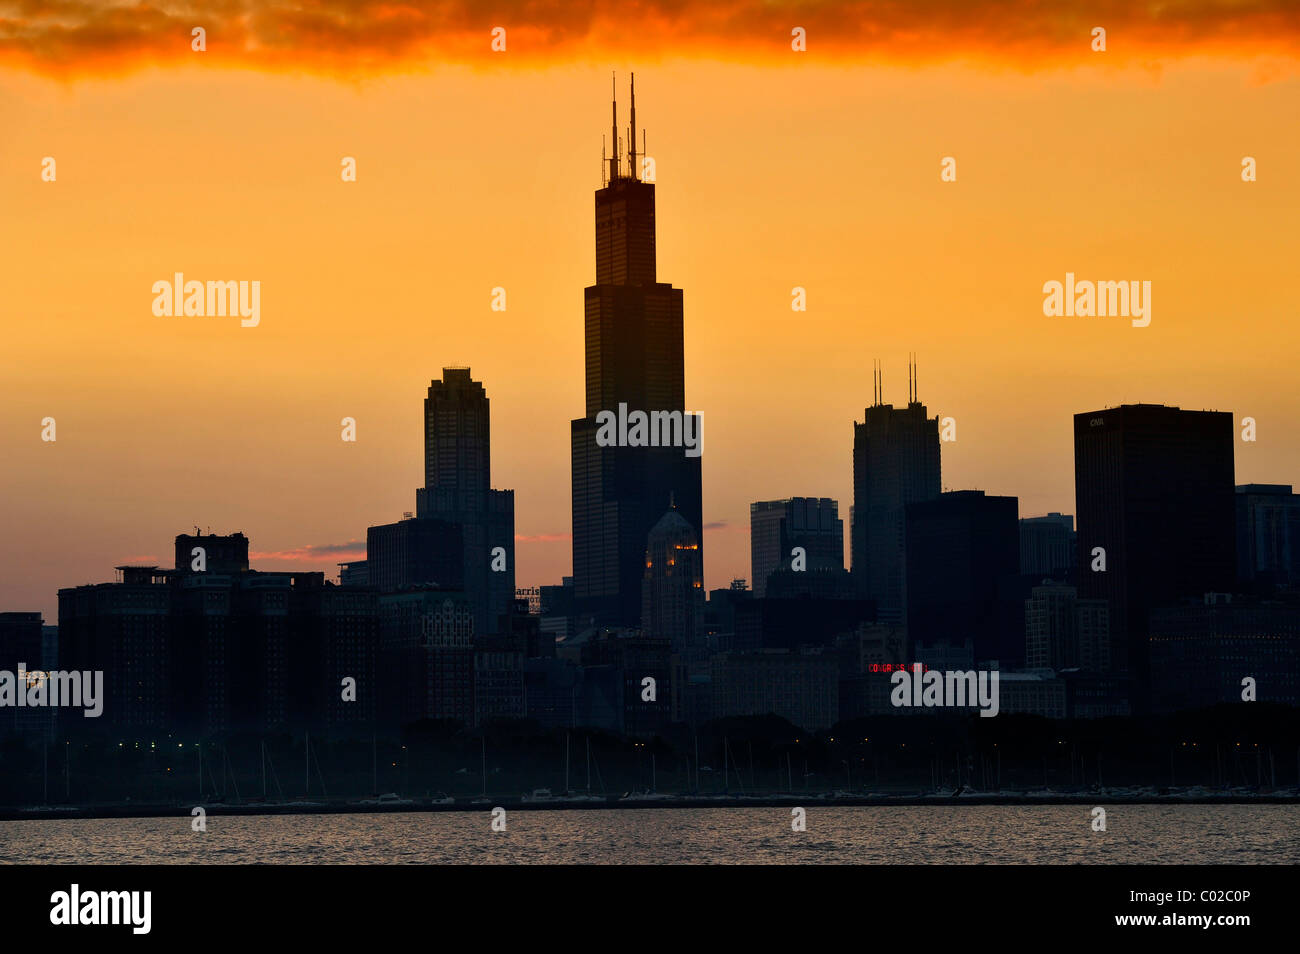 Evening atmosphere, sunset, Willis Tower, named Sears Tower until 2009, 311 South Wacker, skyscrapers, skyline, Lake Michigan Stock Photo